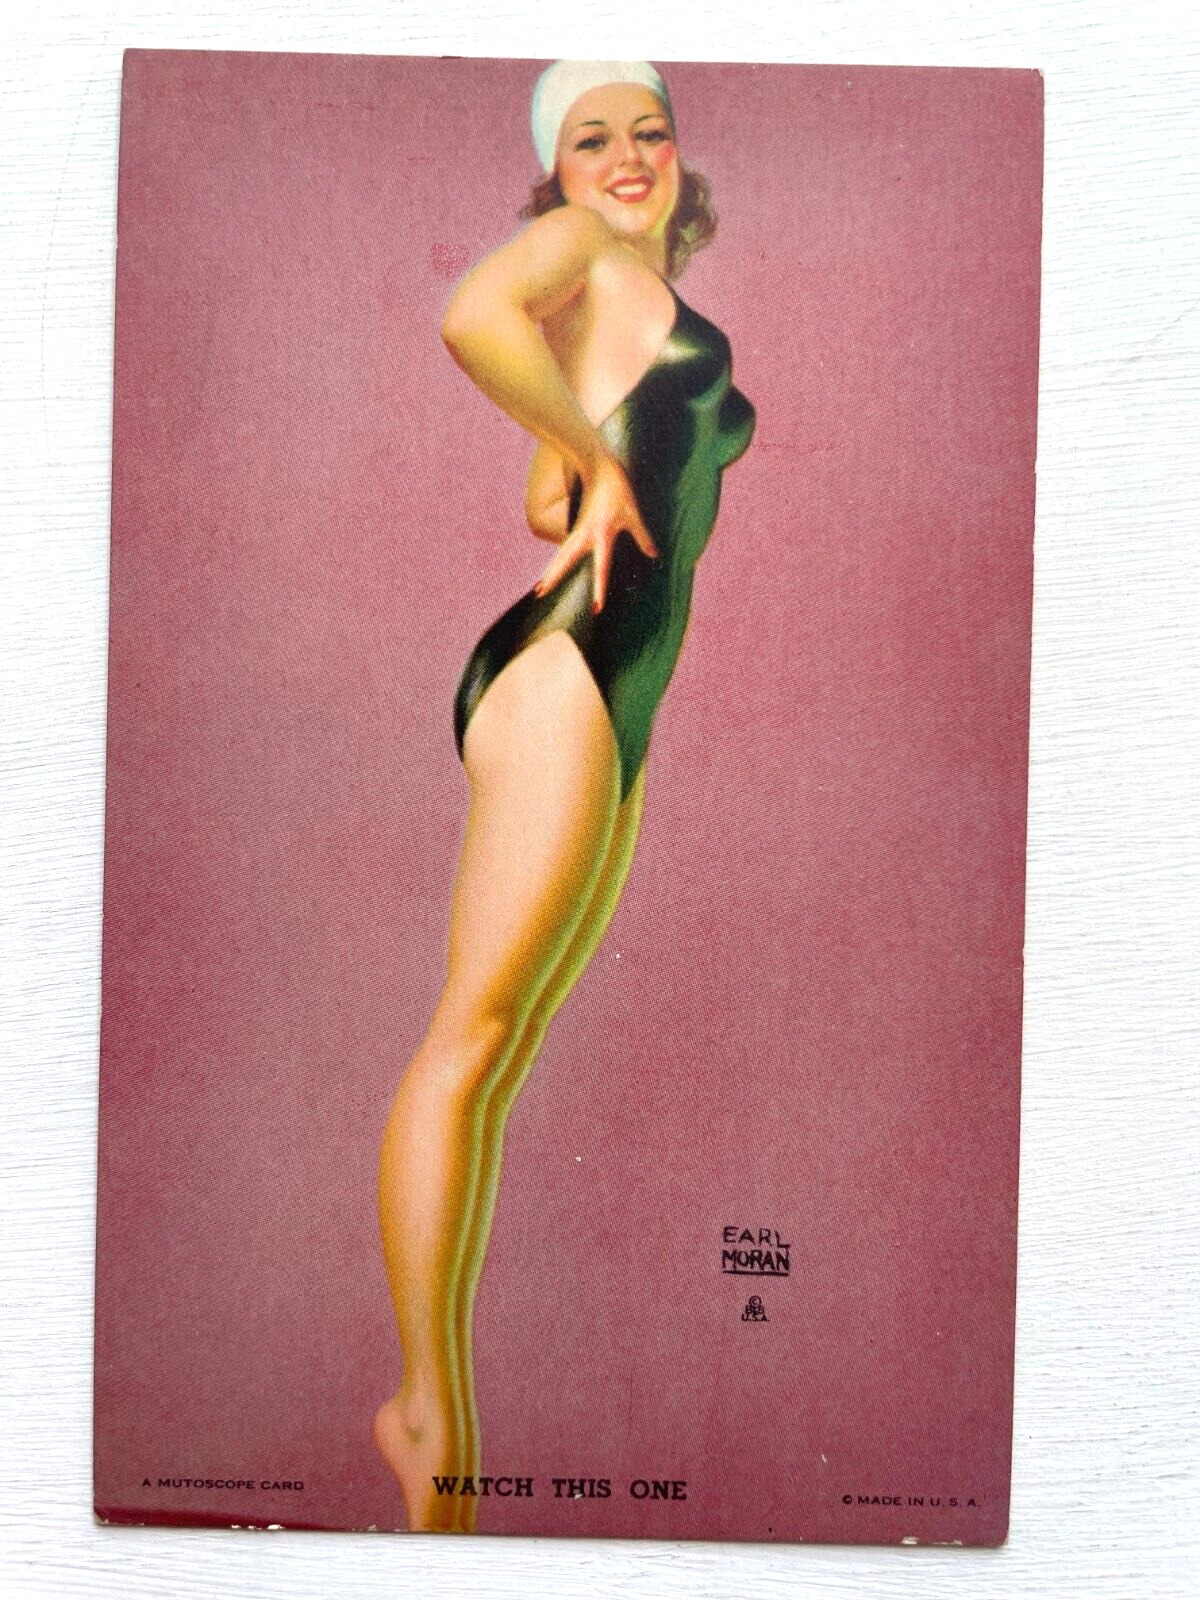 1940's Pinup Girl Picture Mutoscope Card by Earl Moran- Watch This One